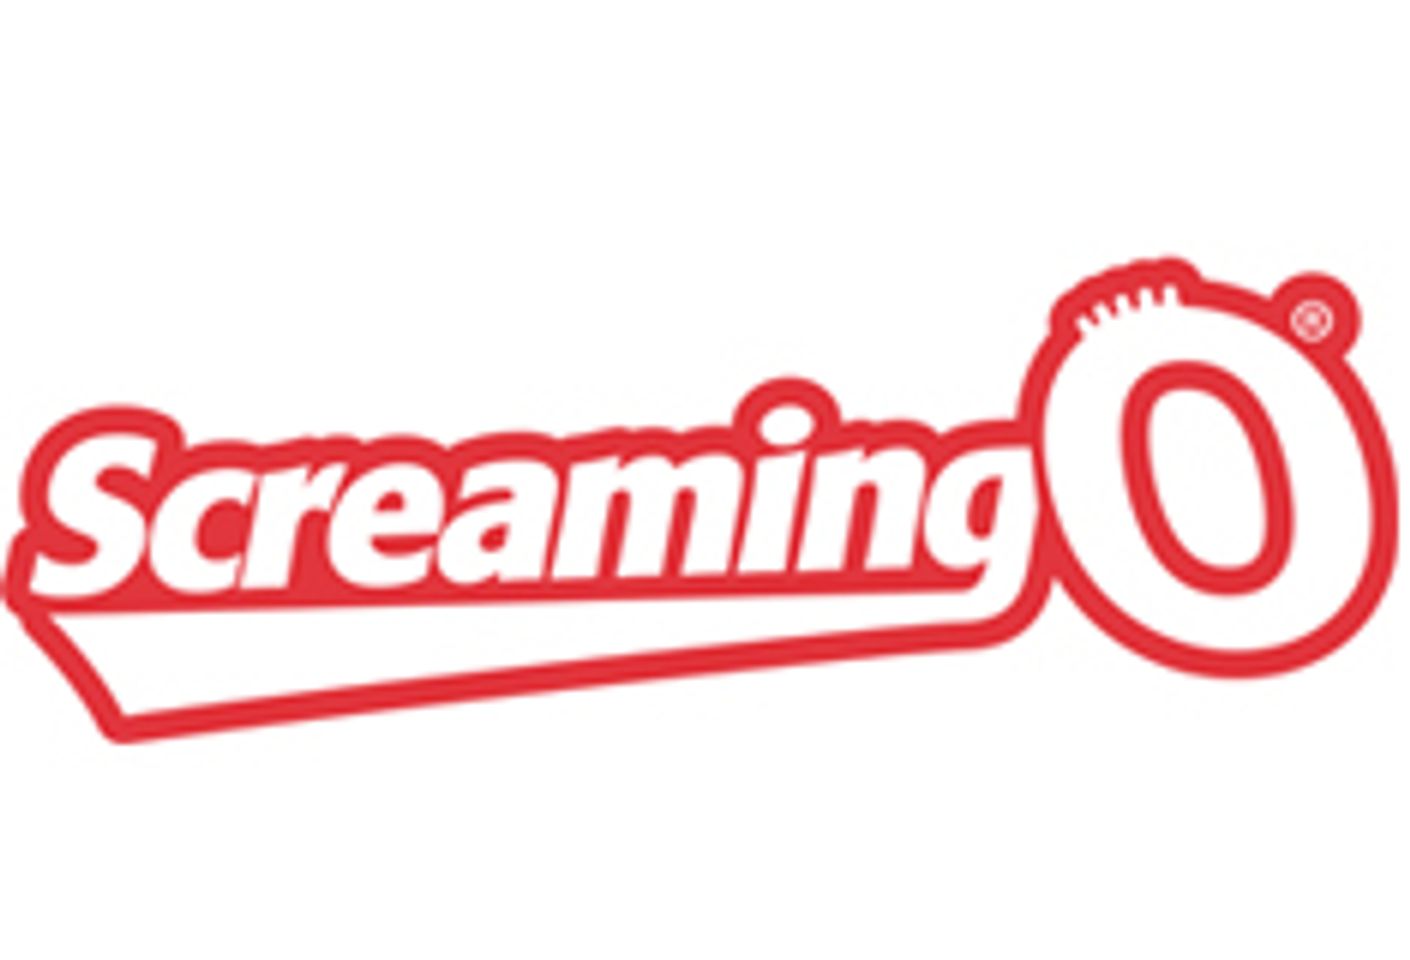 The Screaming O, Rock On & Studio Collection Gets 3 StorErotica Awards Noms